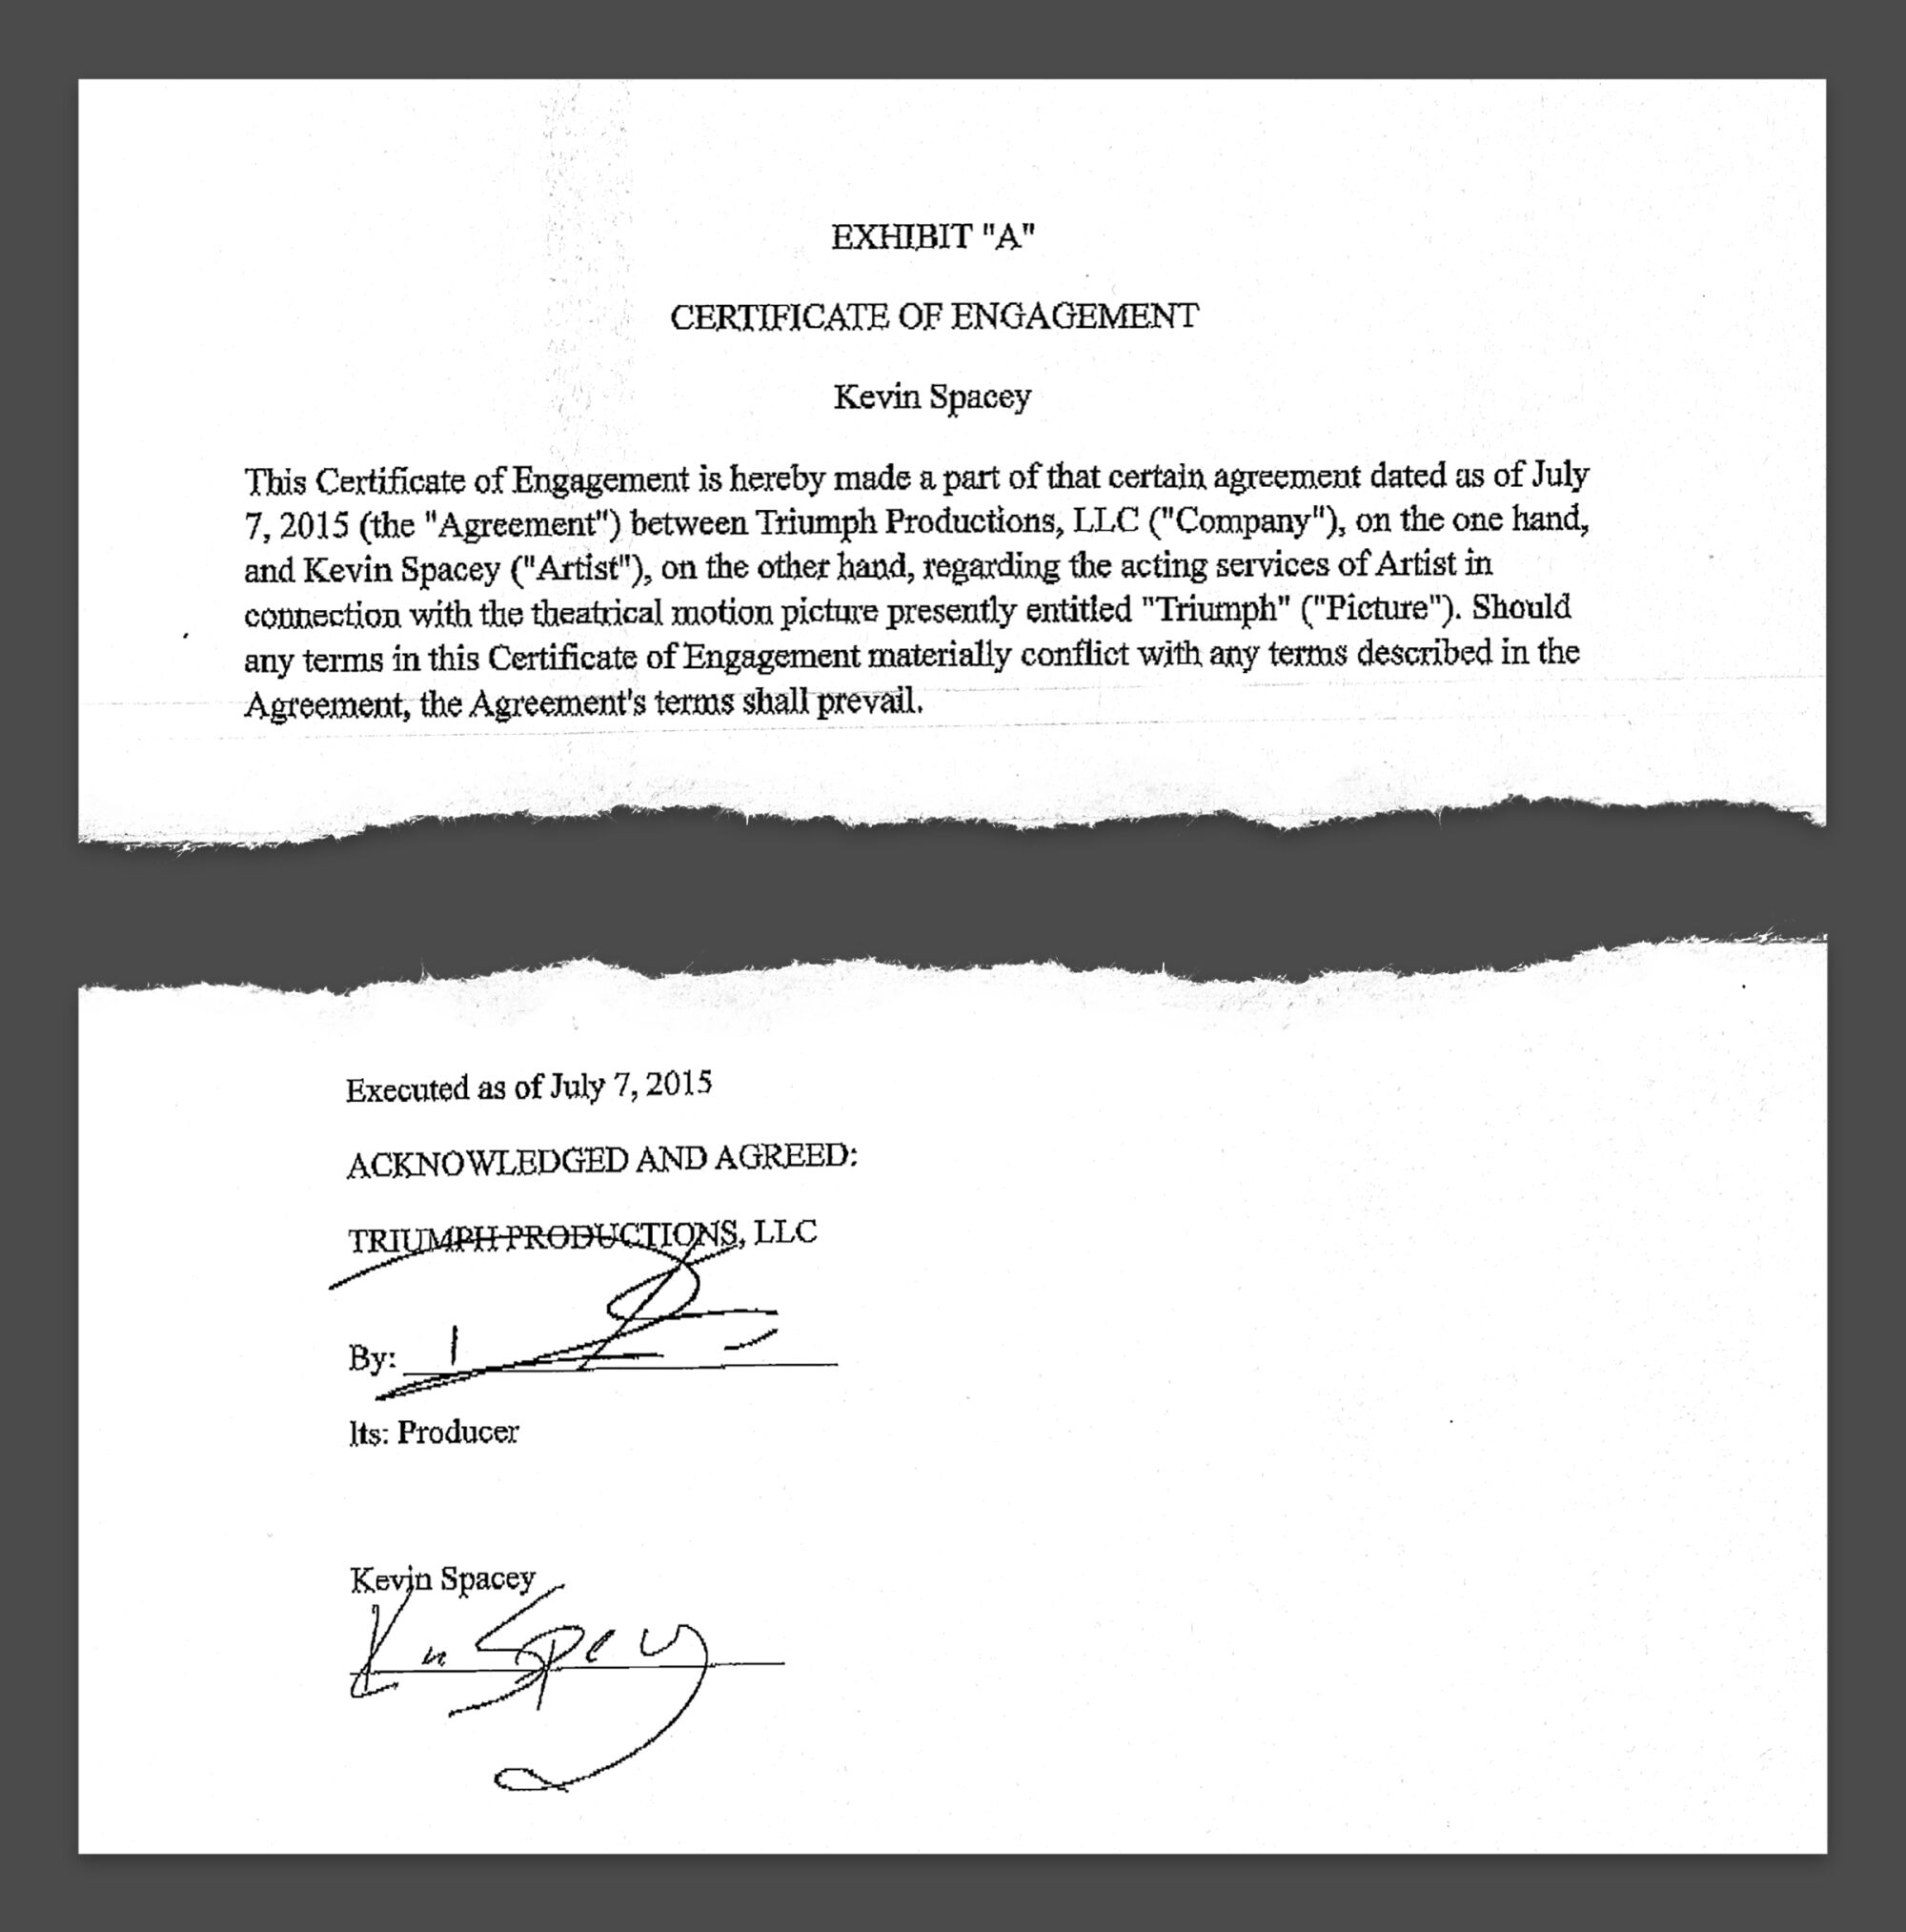 Screenshots of a certificate of engagement signed with a forged signature of Kevin Spacey.